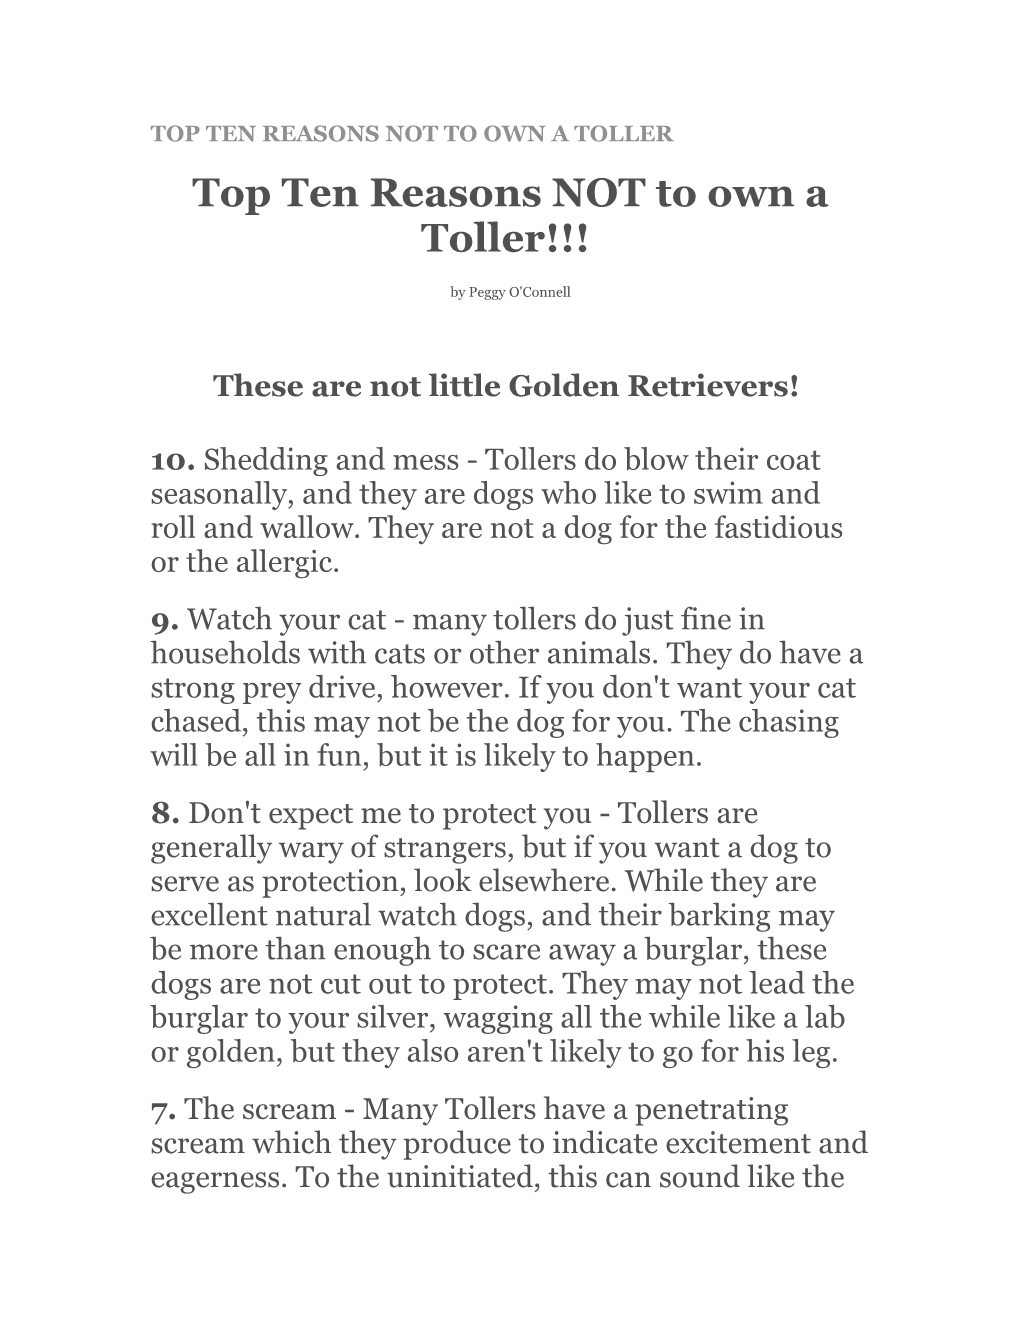 Top Ten Reasons Not to Own a Toller